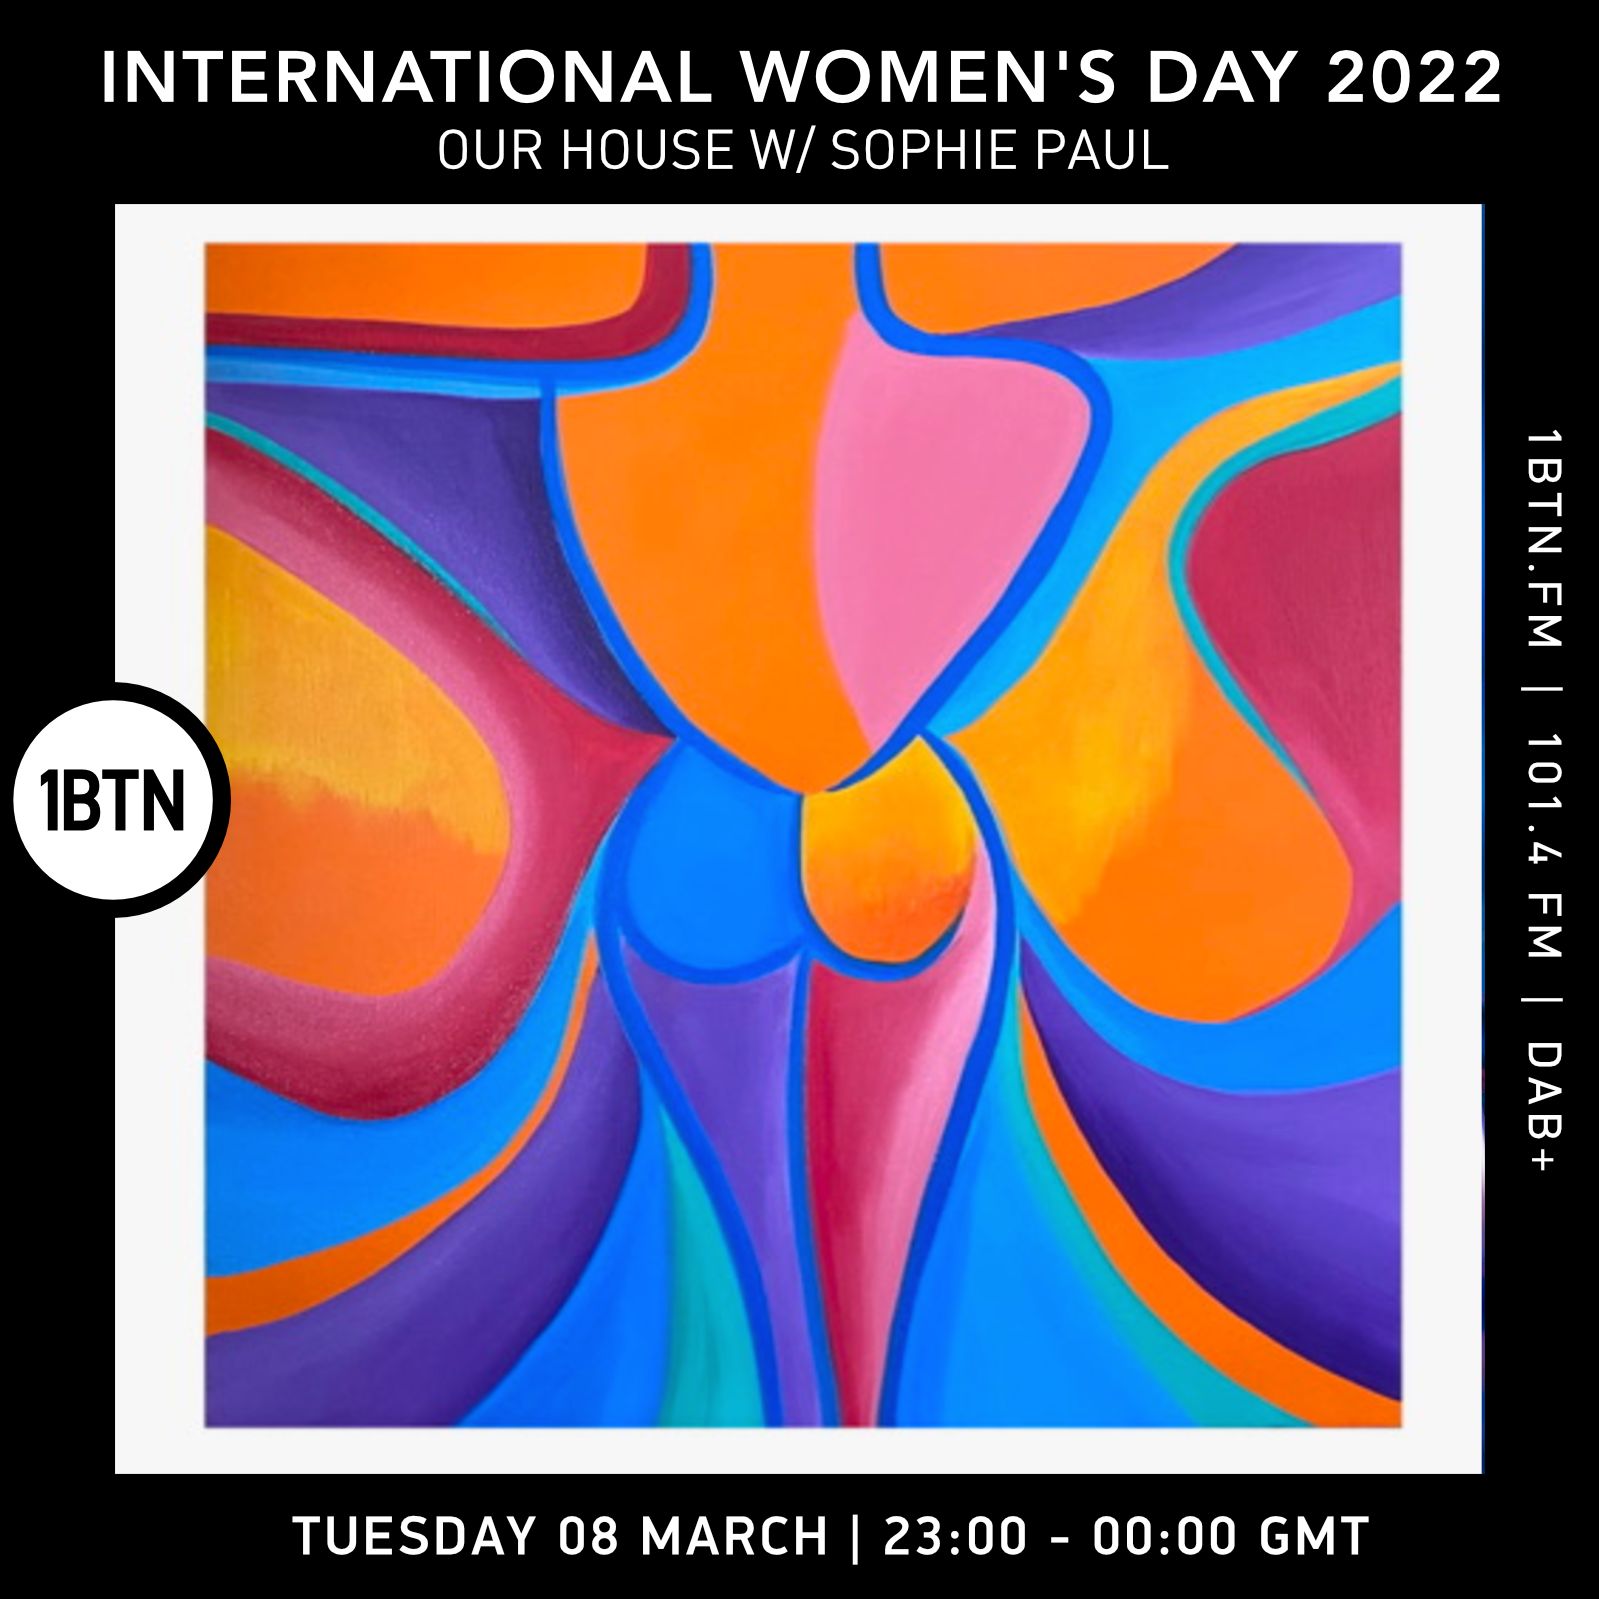 International Women's Day 2022 with Sophie Paul - Our House - 08.03.2022